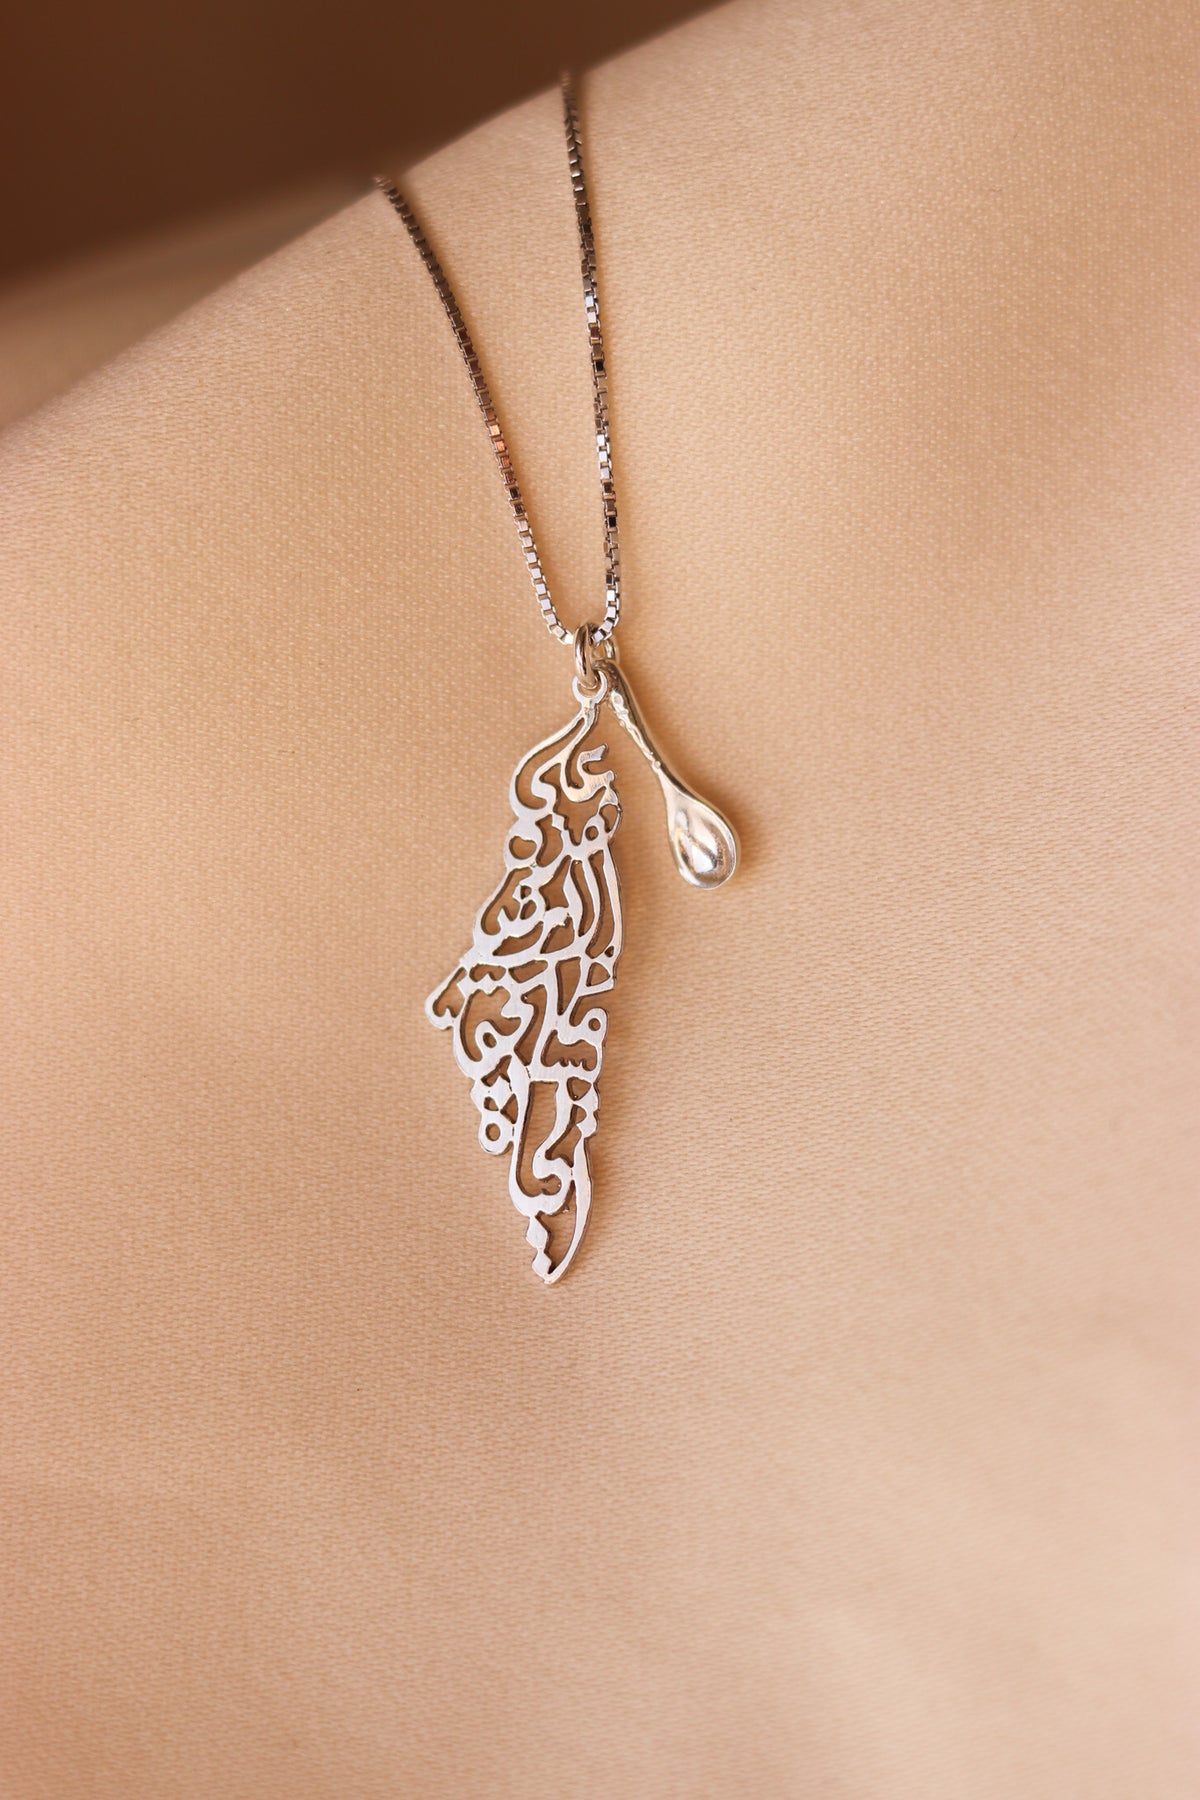 Palestine map with Palestinian famous poem written inside necklace with a symbolic spoon